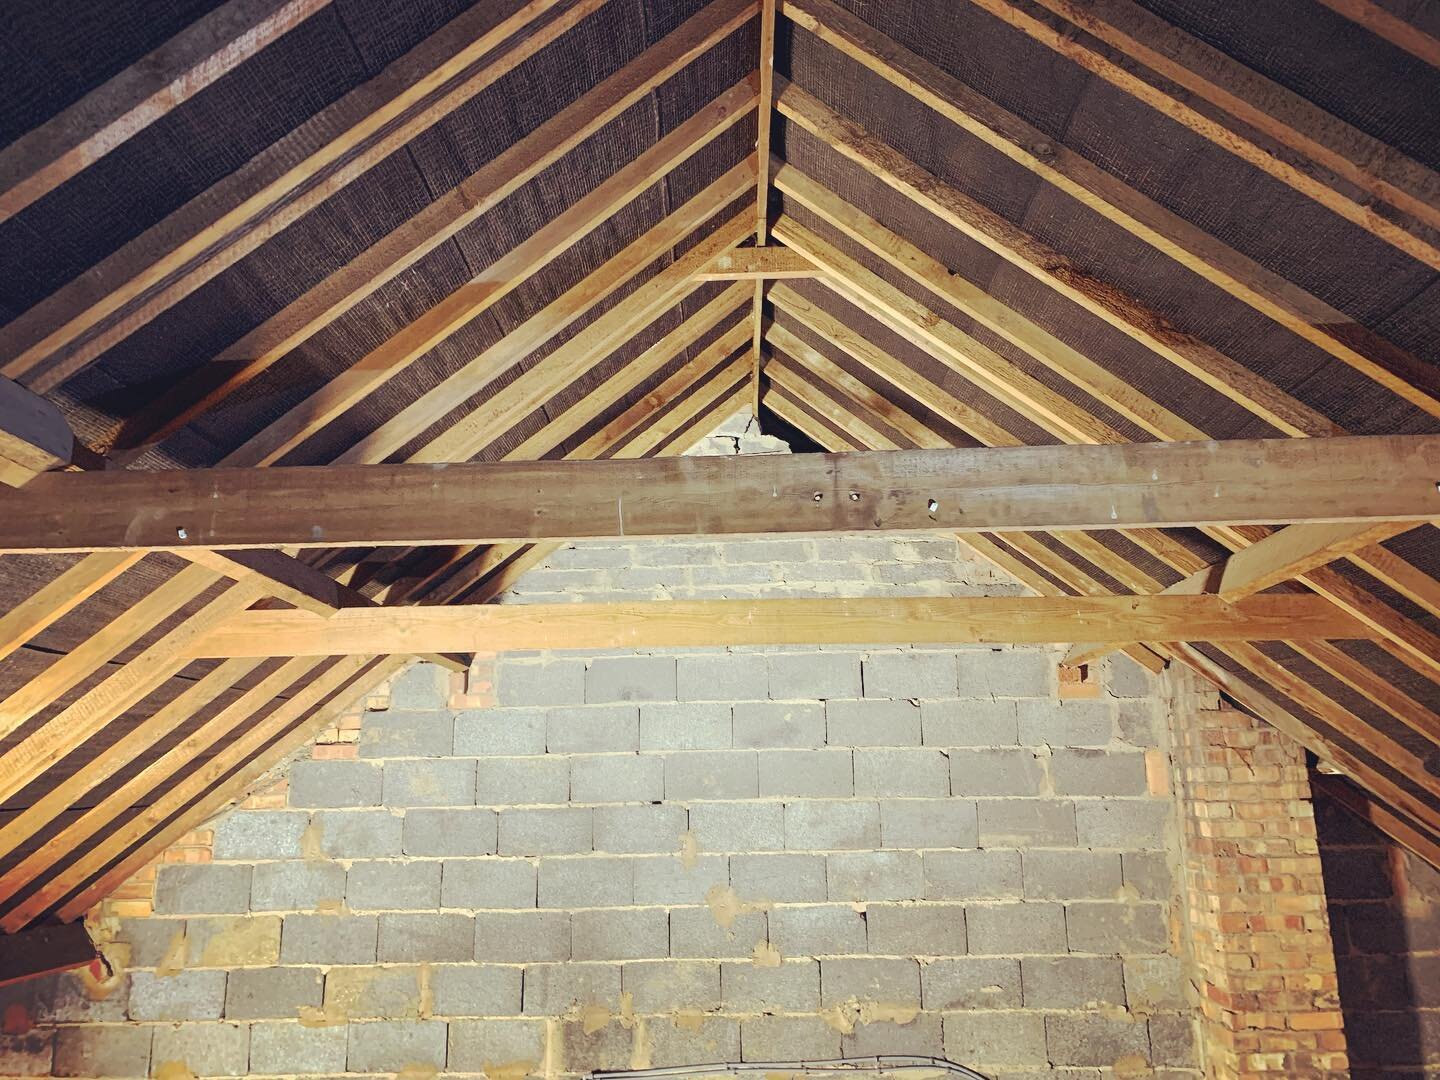 Another day, another loft to be converted 

#loftconversion #roof #structuralengineering #timberroof #loft